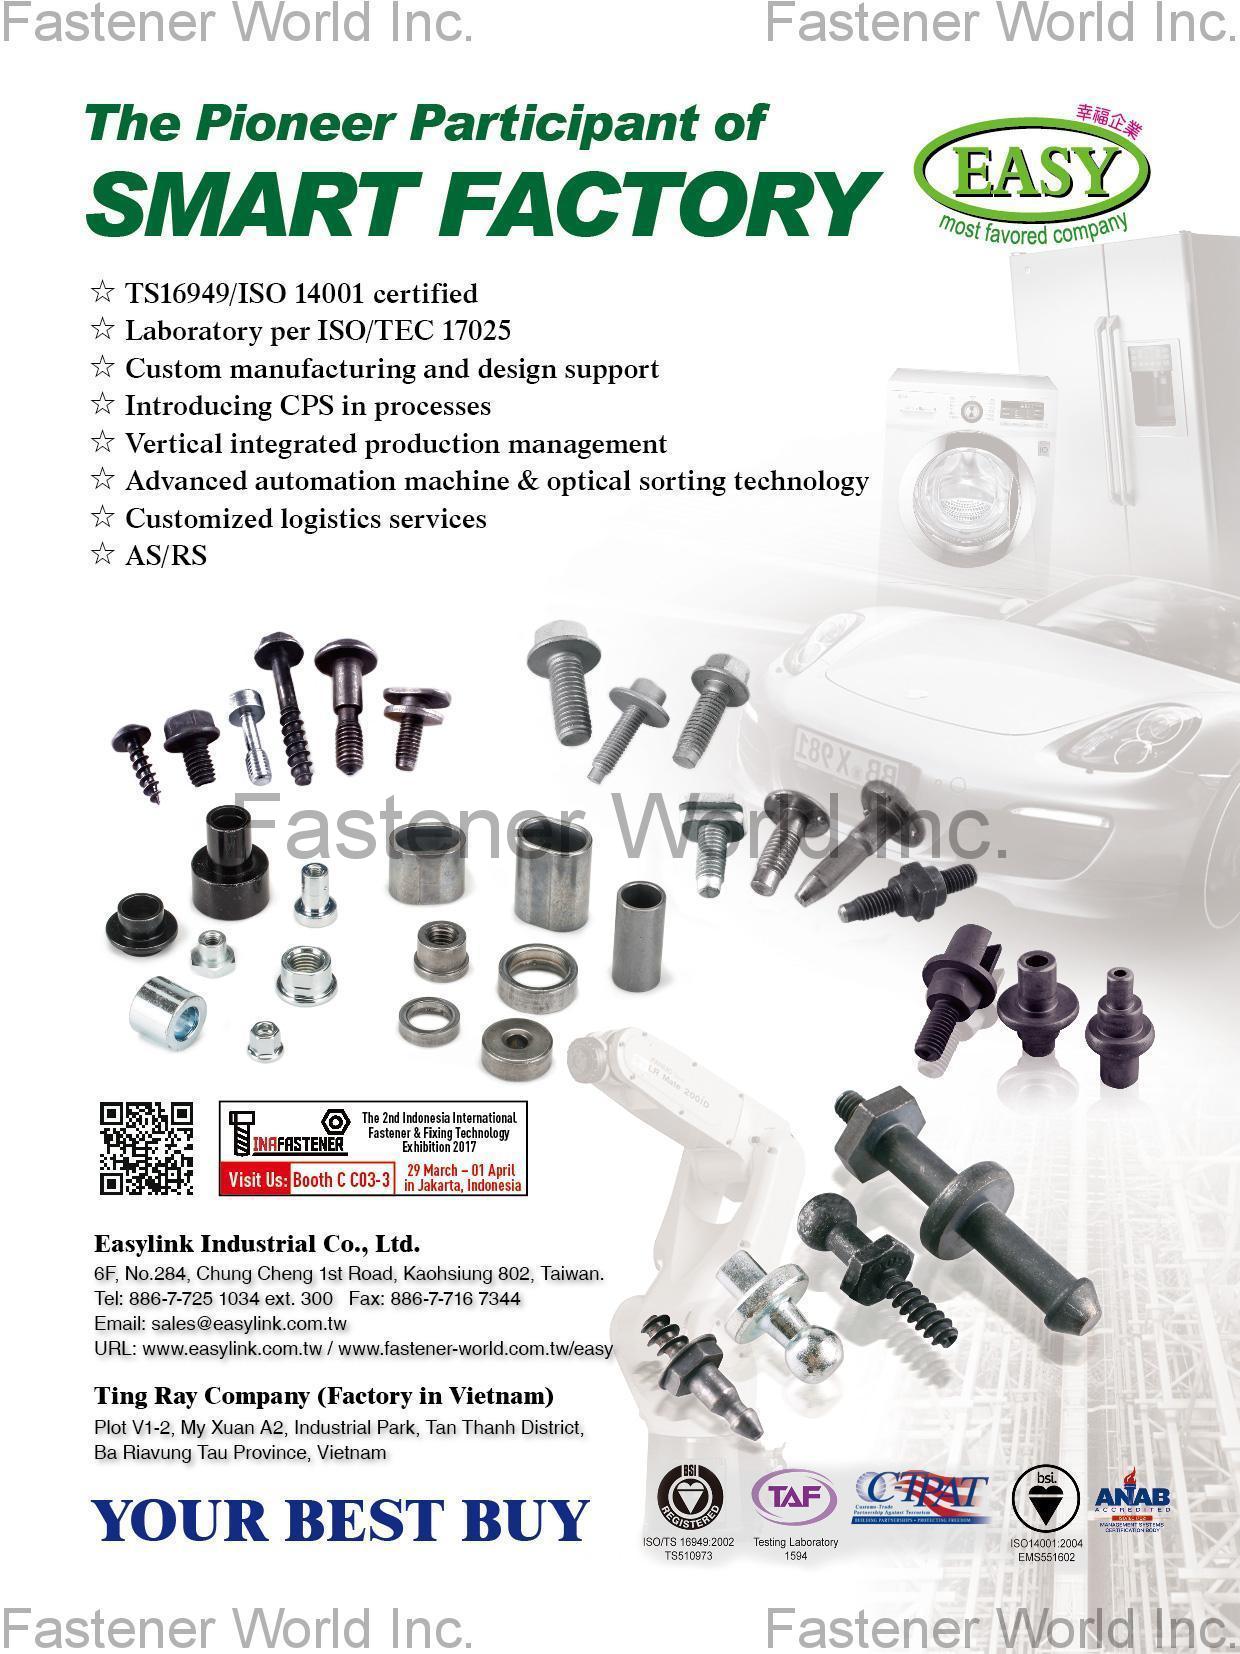 EASYLINK INDUSTRIAL CO., LTD. , Automotive Part, Electronic Screw, Standard Parts, Furniture Components , All Kinds of Screws